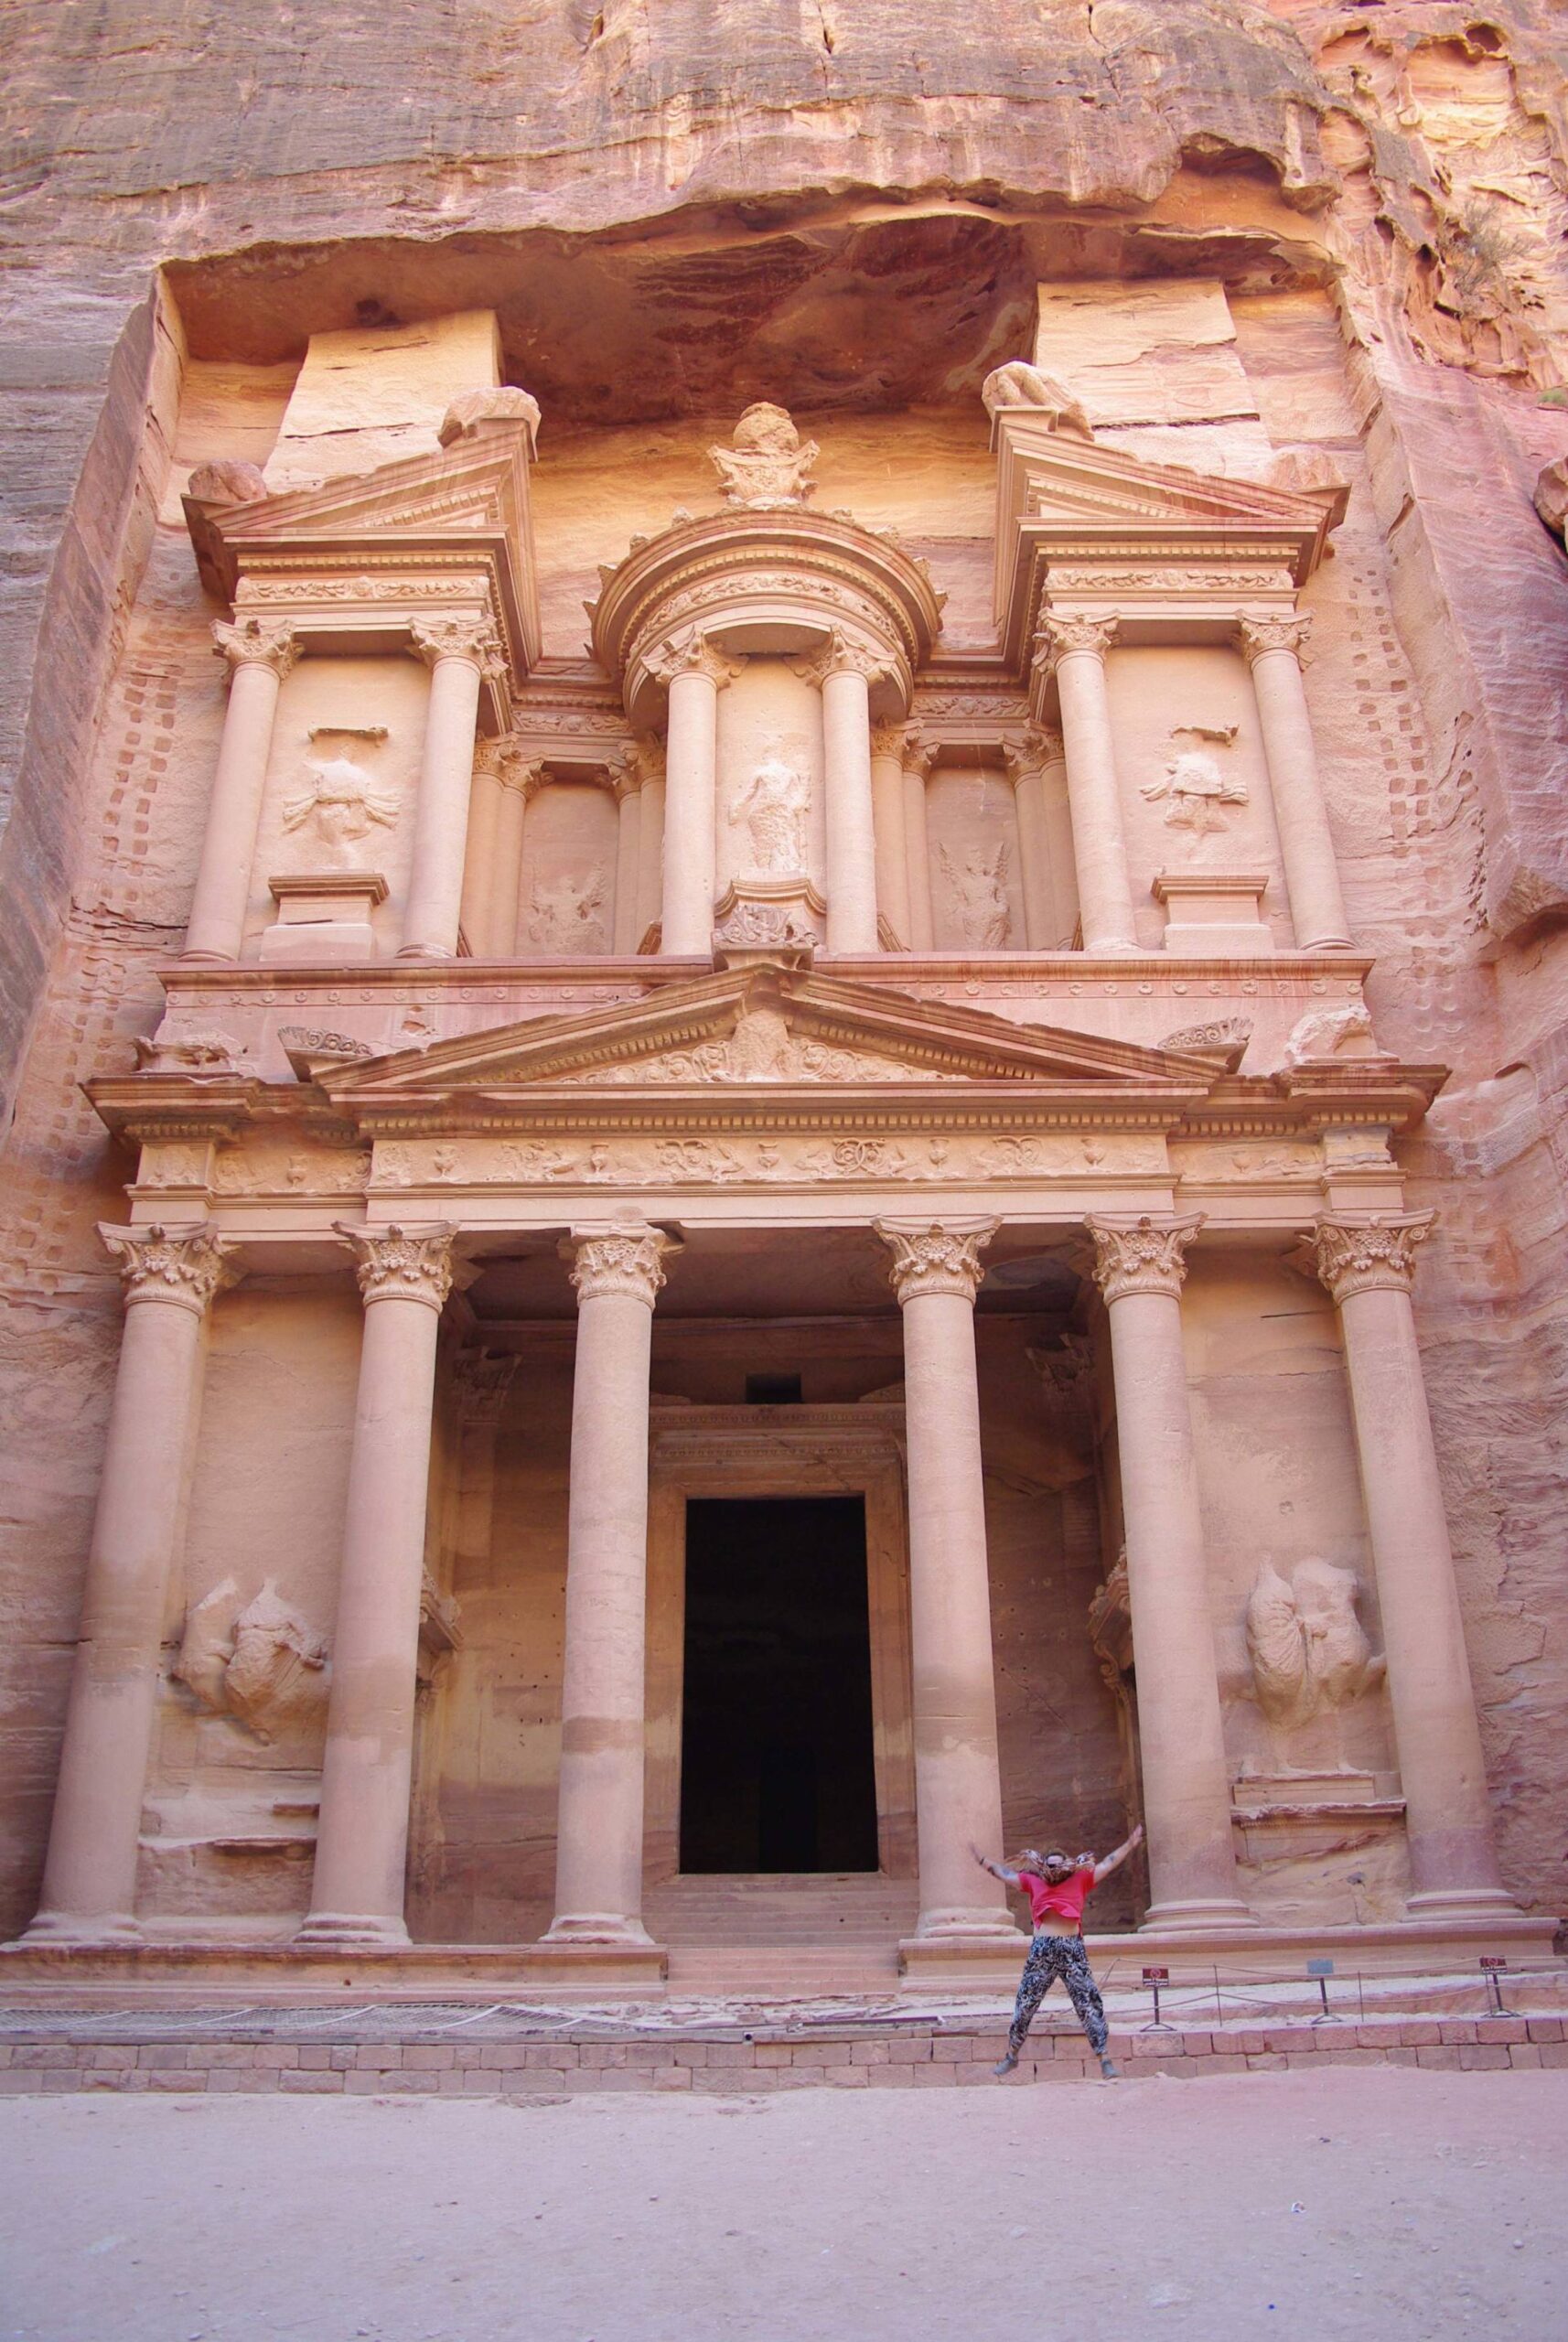 One of the most photographed locations in the world - The treasury at Petra